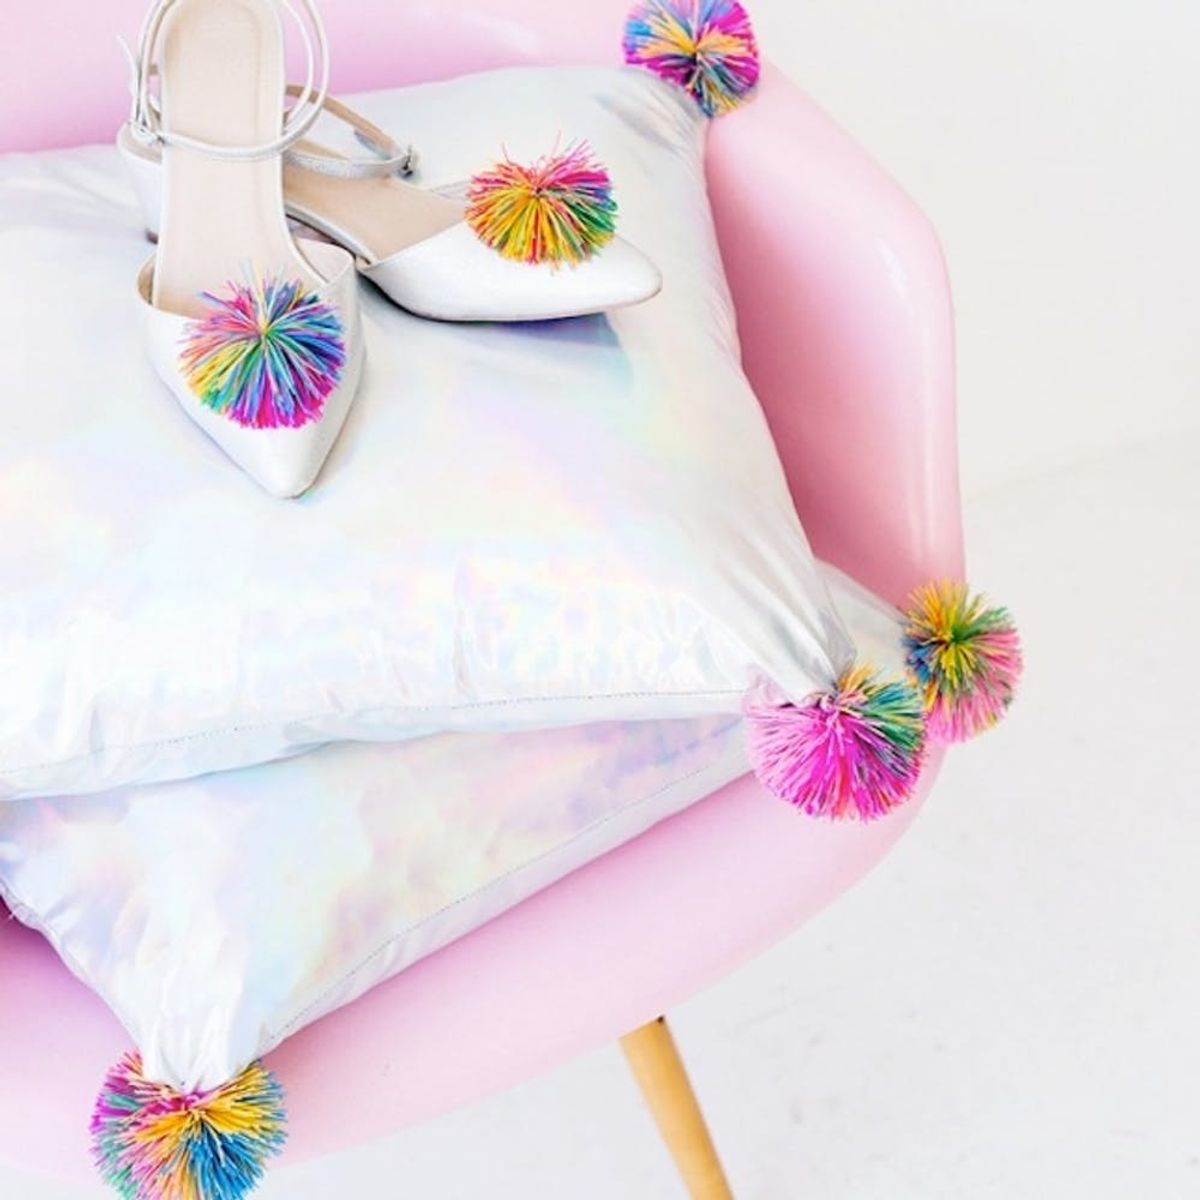 16 DIY Pillows to Update Your Spring Decor